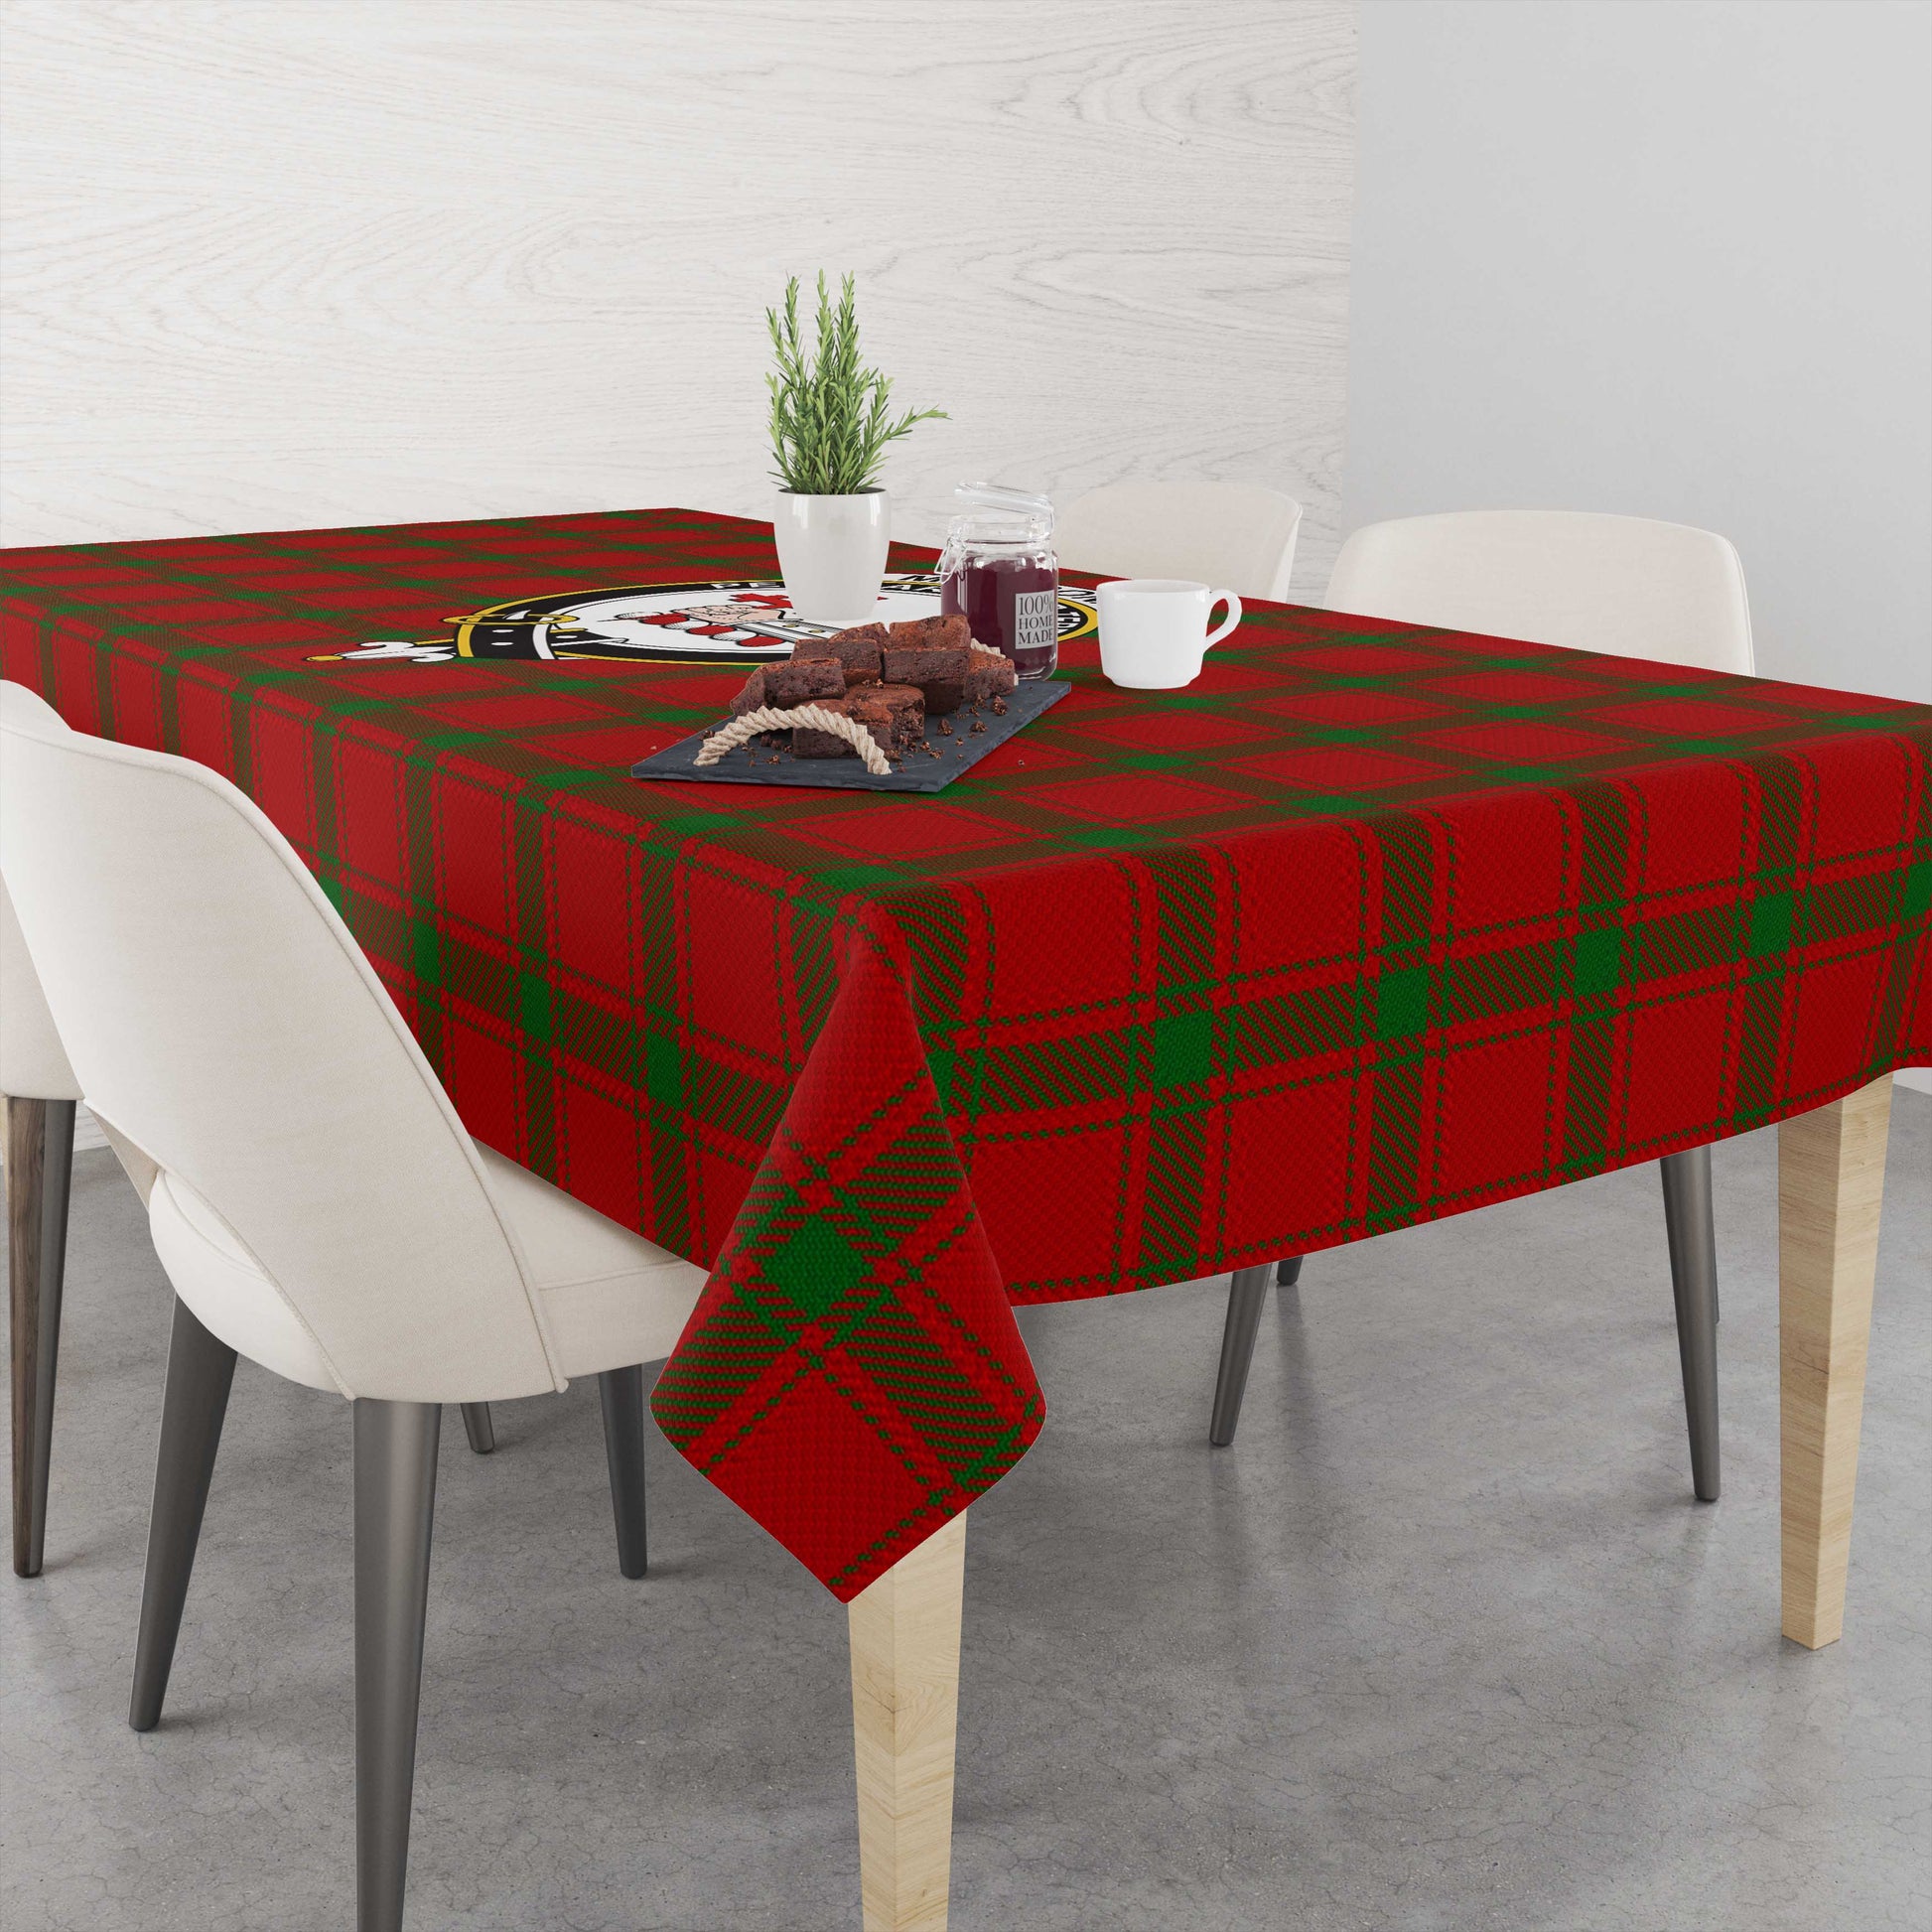 macdonald-of-sleat-tatan-tablecloth-with-family-crest